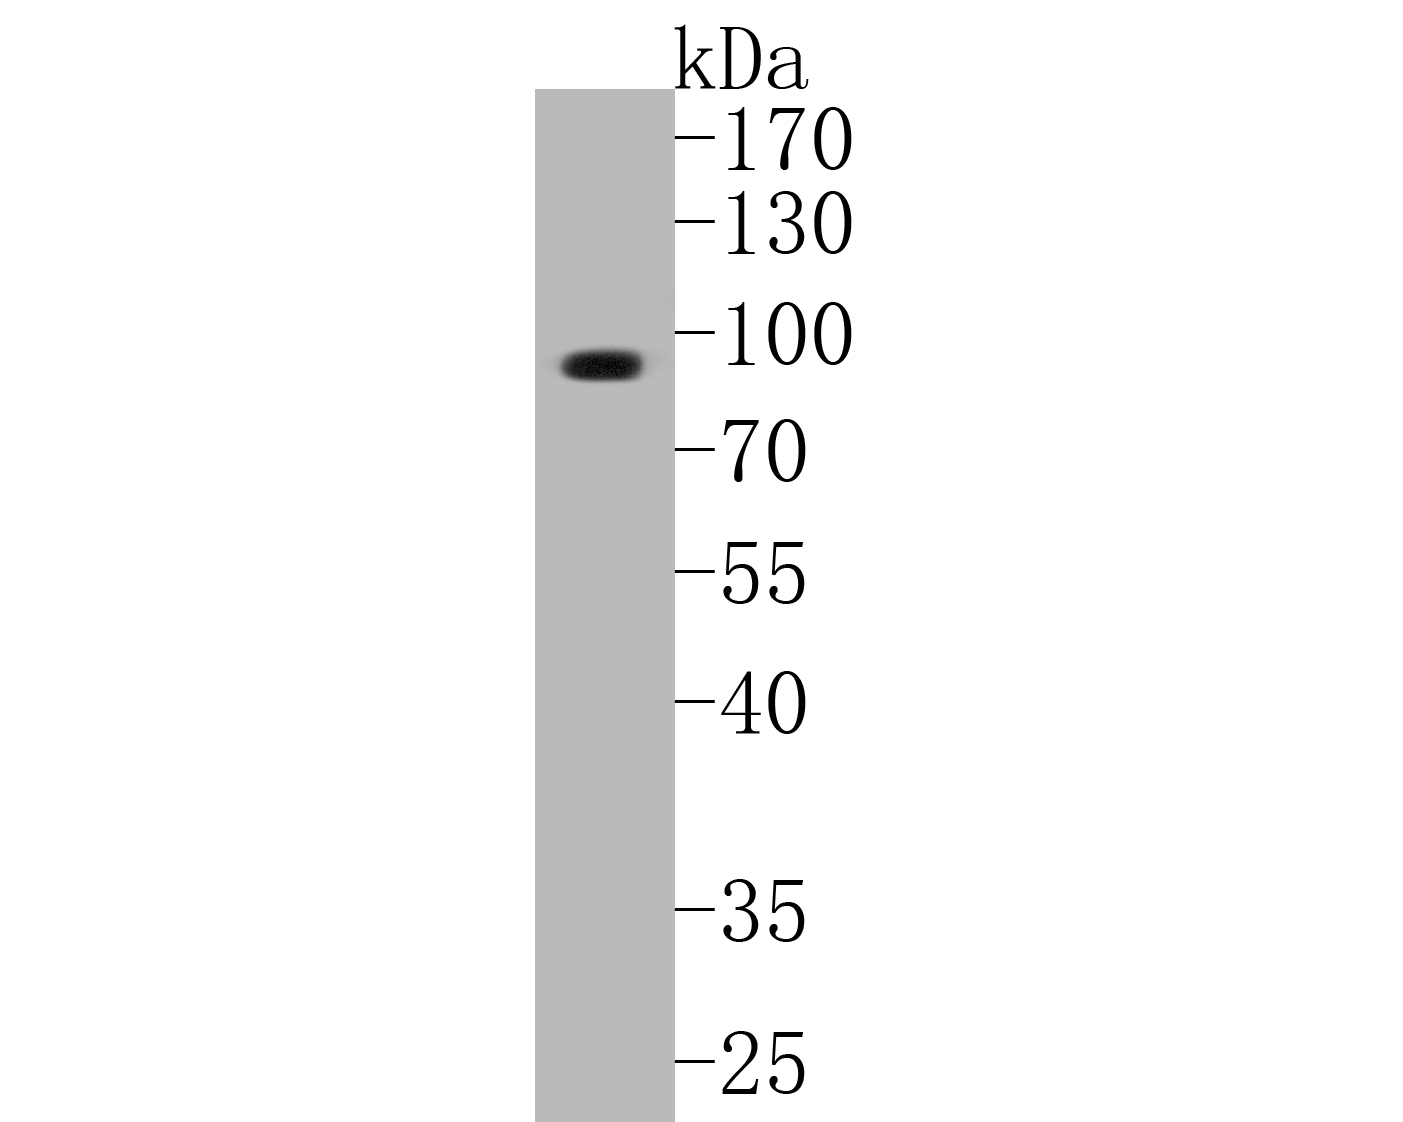 Western blot analysis of KCNK9 on rat cerebellum tissue lysates. Proteins were transferred to a PVDF membrane and blocked with 5% BSA in PBS for 1 hour at room temperature. The primary antibody (ER1902-47, 1/500) was used in 5% BSA at room temperature for 2 hours. Goat Anti-Rabbit IgG - HRP Secondary Antibody (HA1001) at 1:5,000 dilution was used for 1 hour at room temperature.